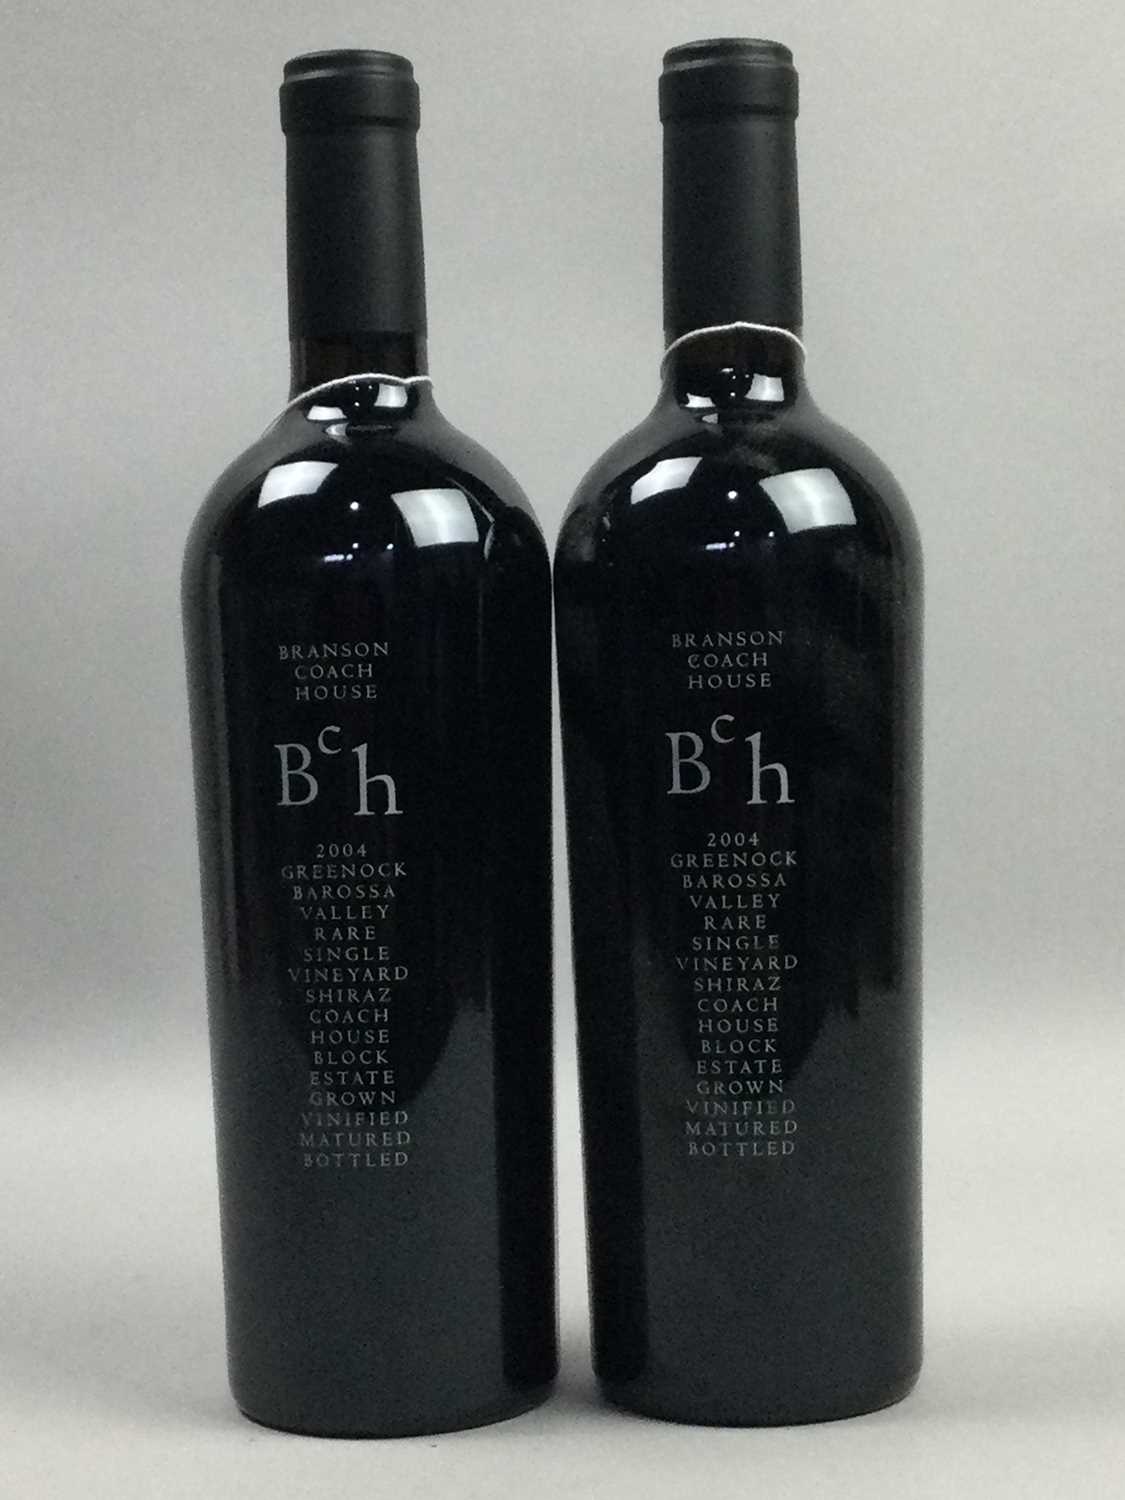 Lot 398 - A LOT OF TWO BOTTLES OF BRANSON COACH HOUSE 2004 RED WINE